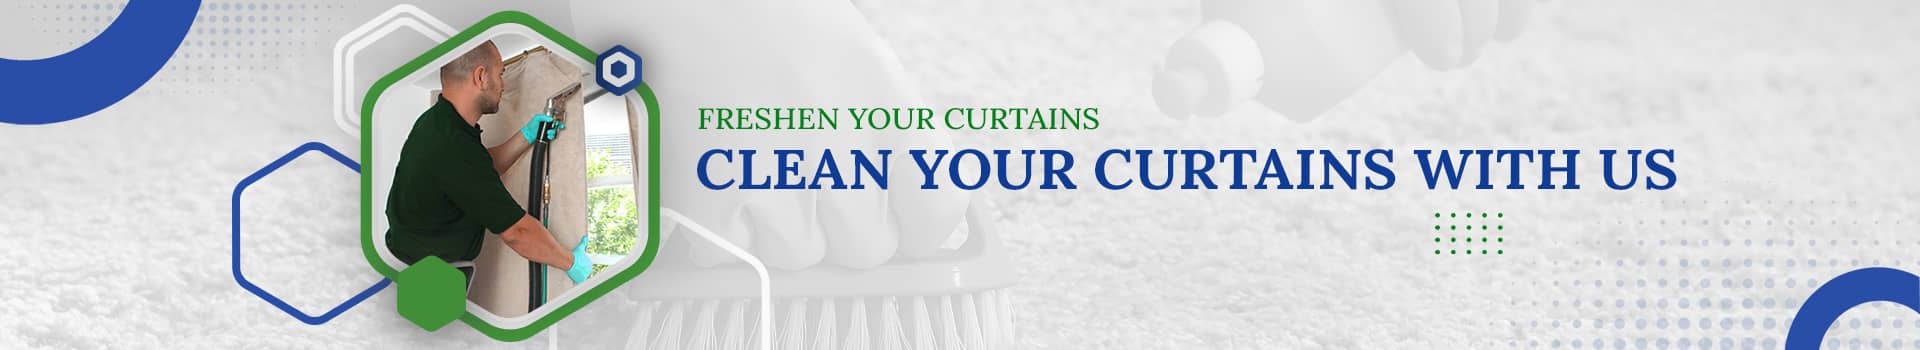 Curtain Cleaning Services - Upkeepcity